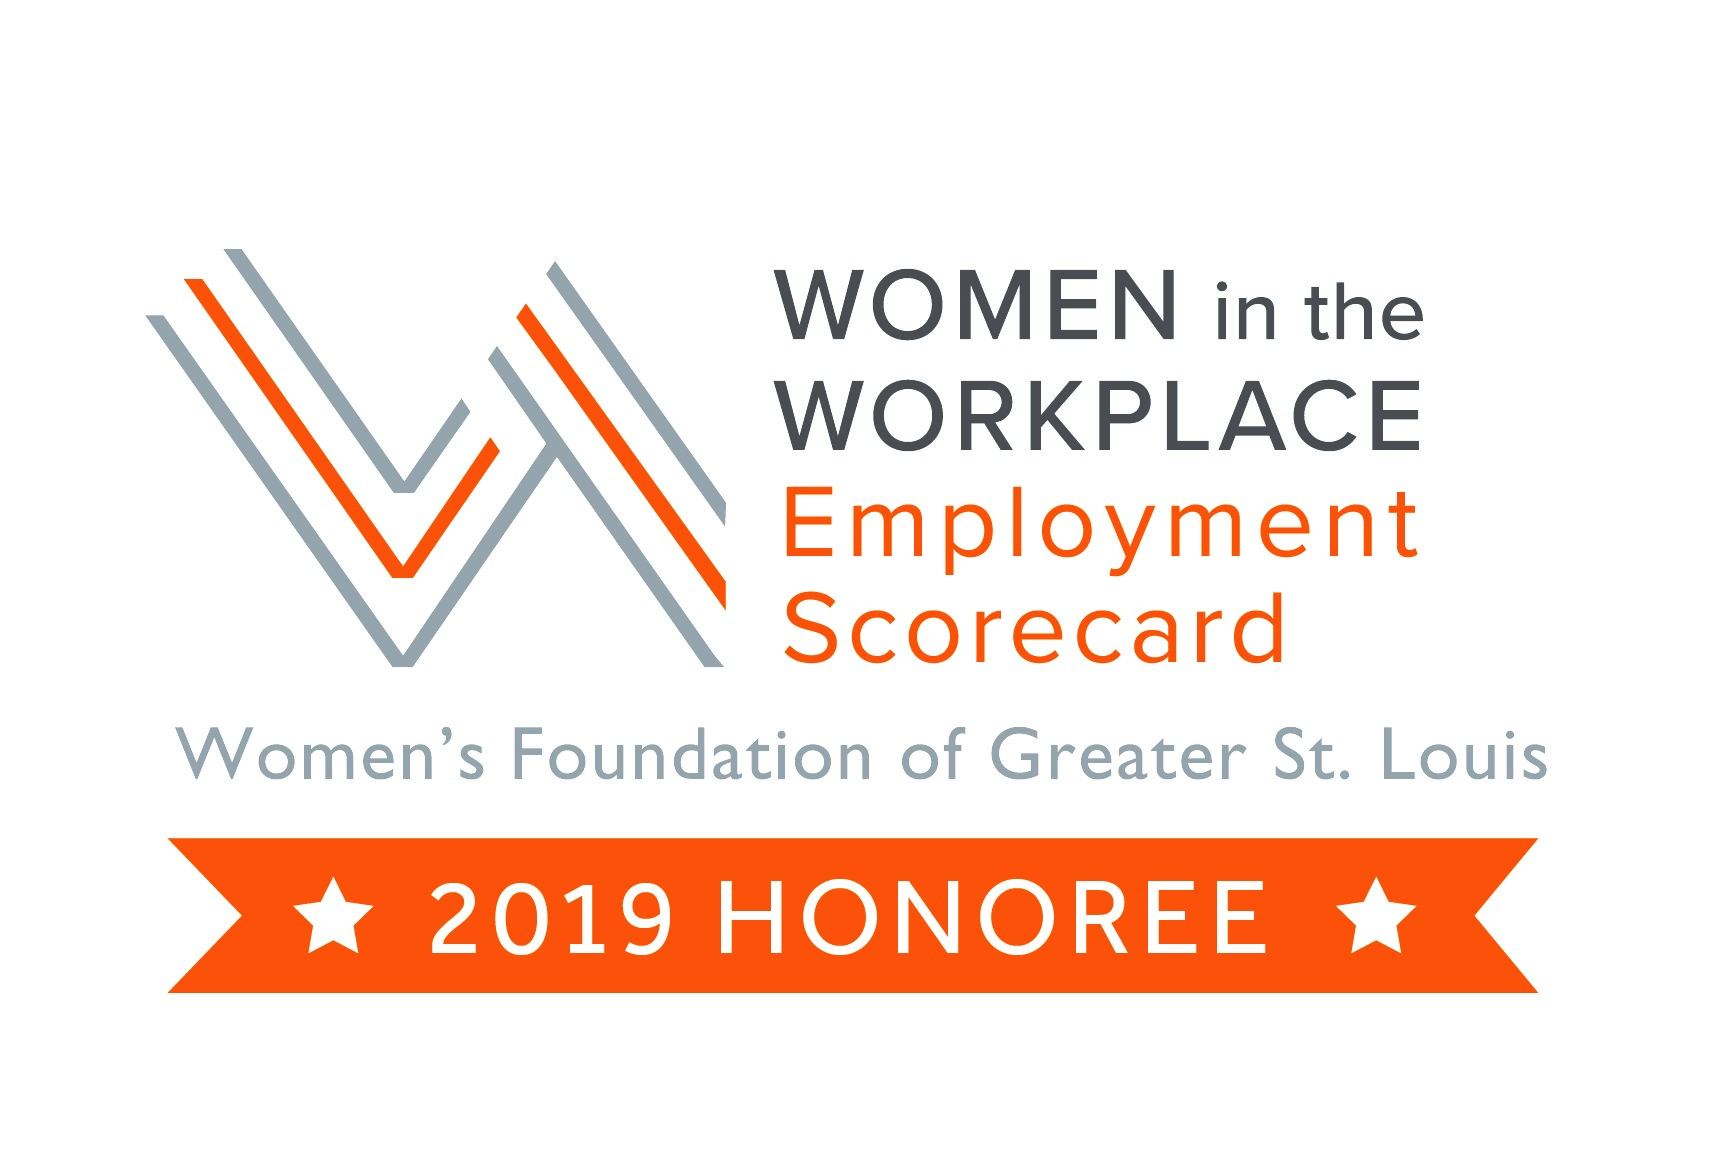 Women in the Workplace Honoree 2019